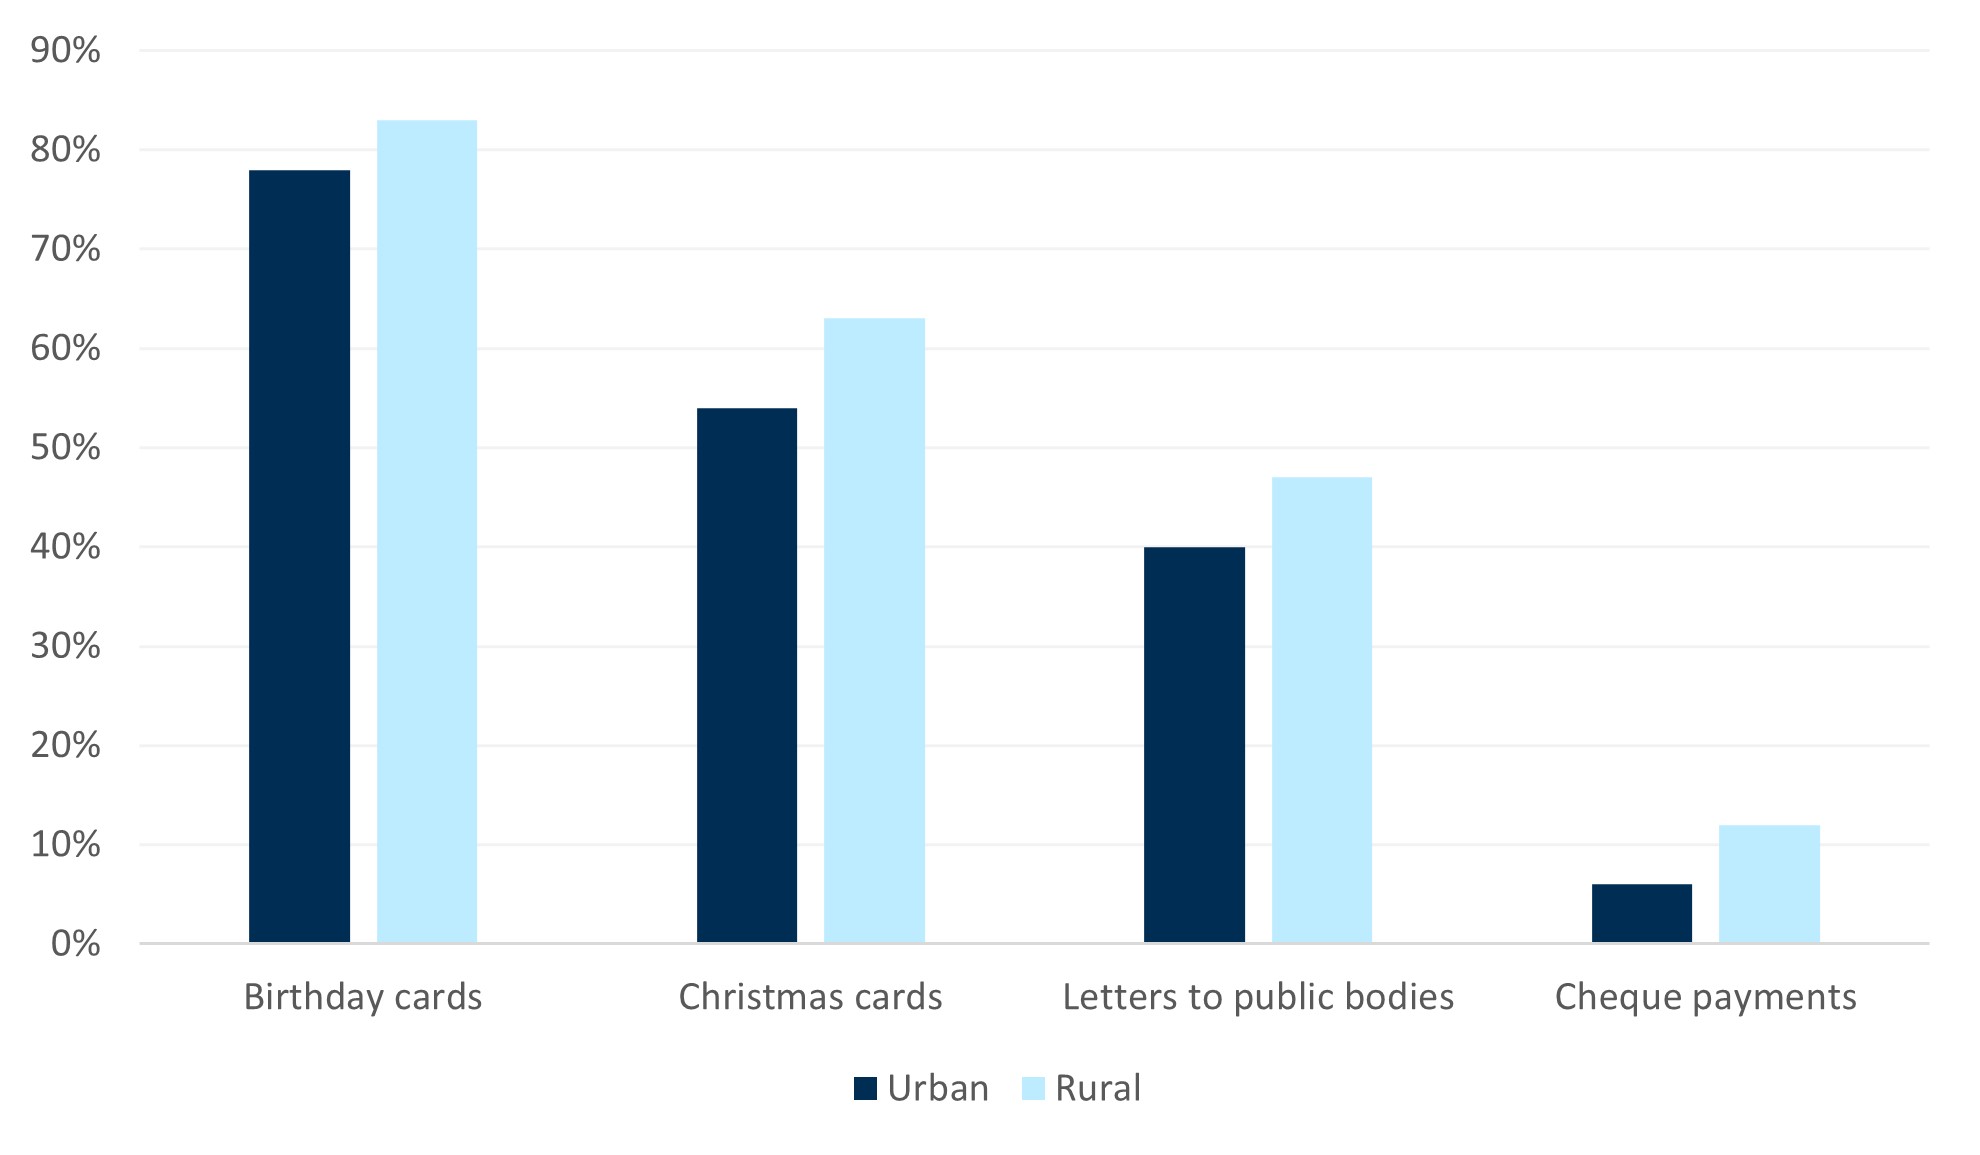 Bar chart showing the differences between urban and rural respondents in what post they are sending which found birthday cards, Christmas cards, personal correspondence, letters to public bodies, and cheque payments are more commonly sent by those in rural areas than urban areas.